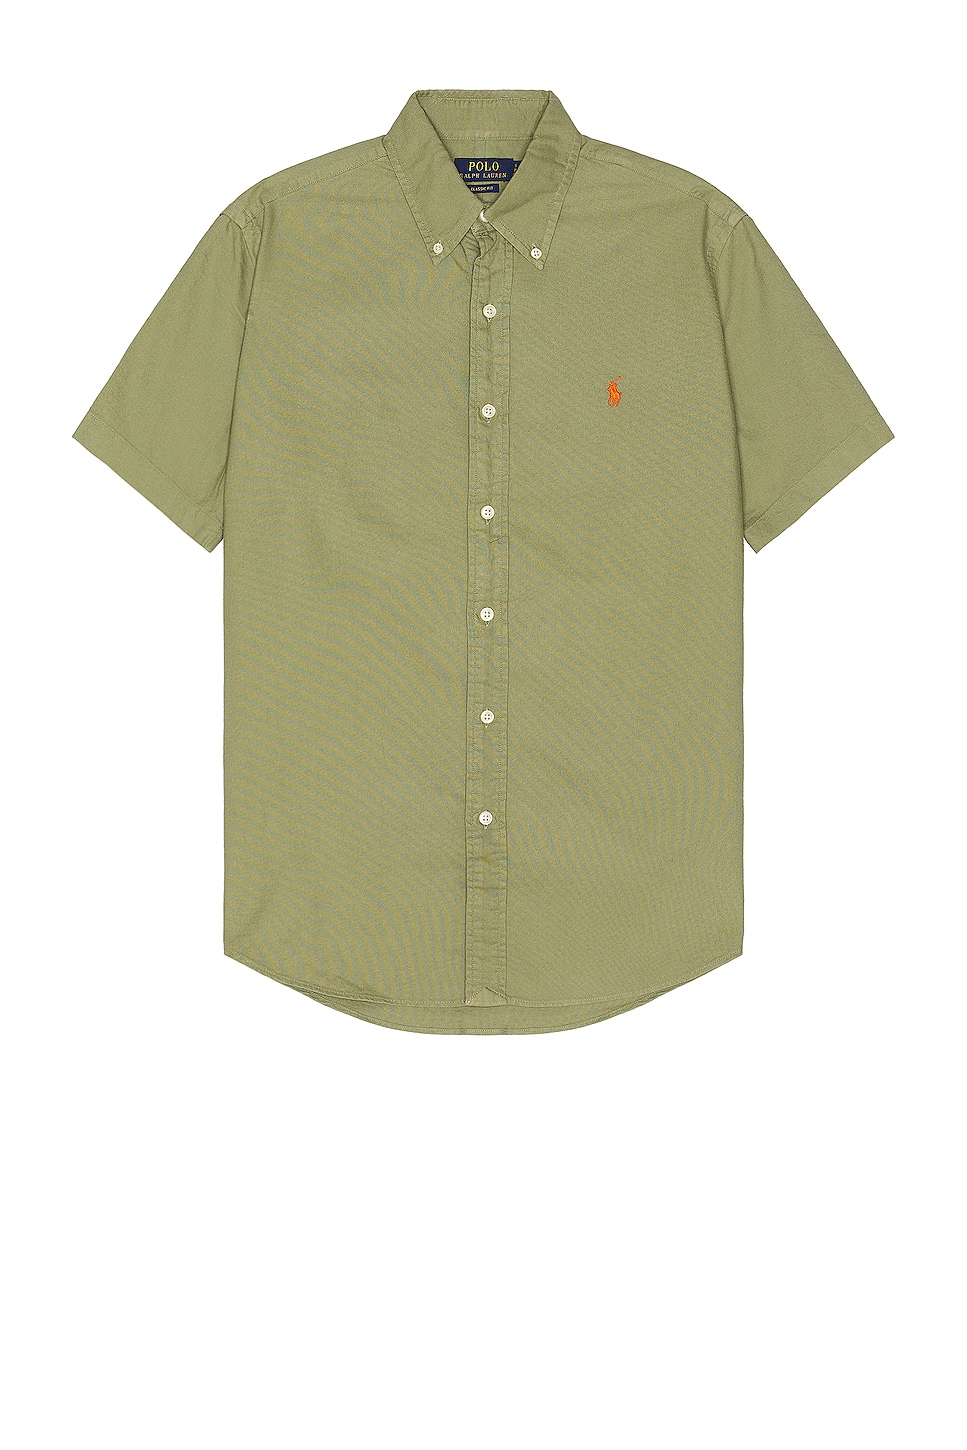 Image 1 of Polo Ralph Lauren Oxford Sport Shirt in Sage Green